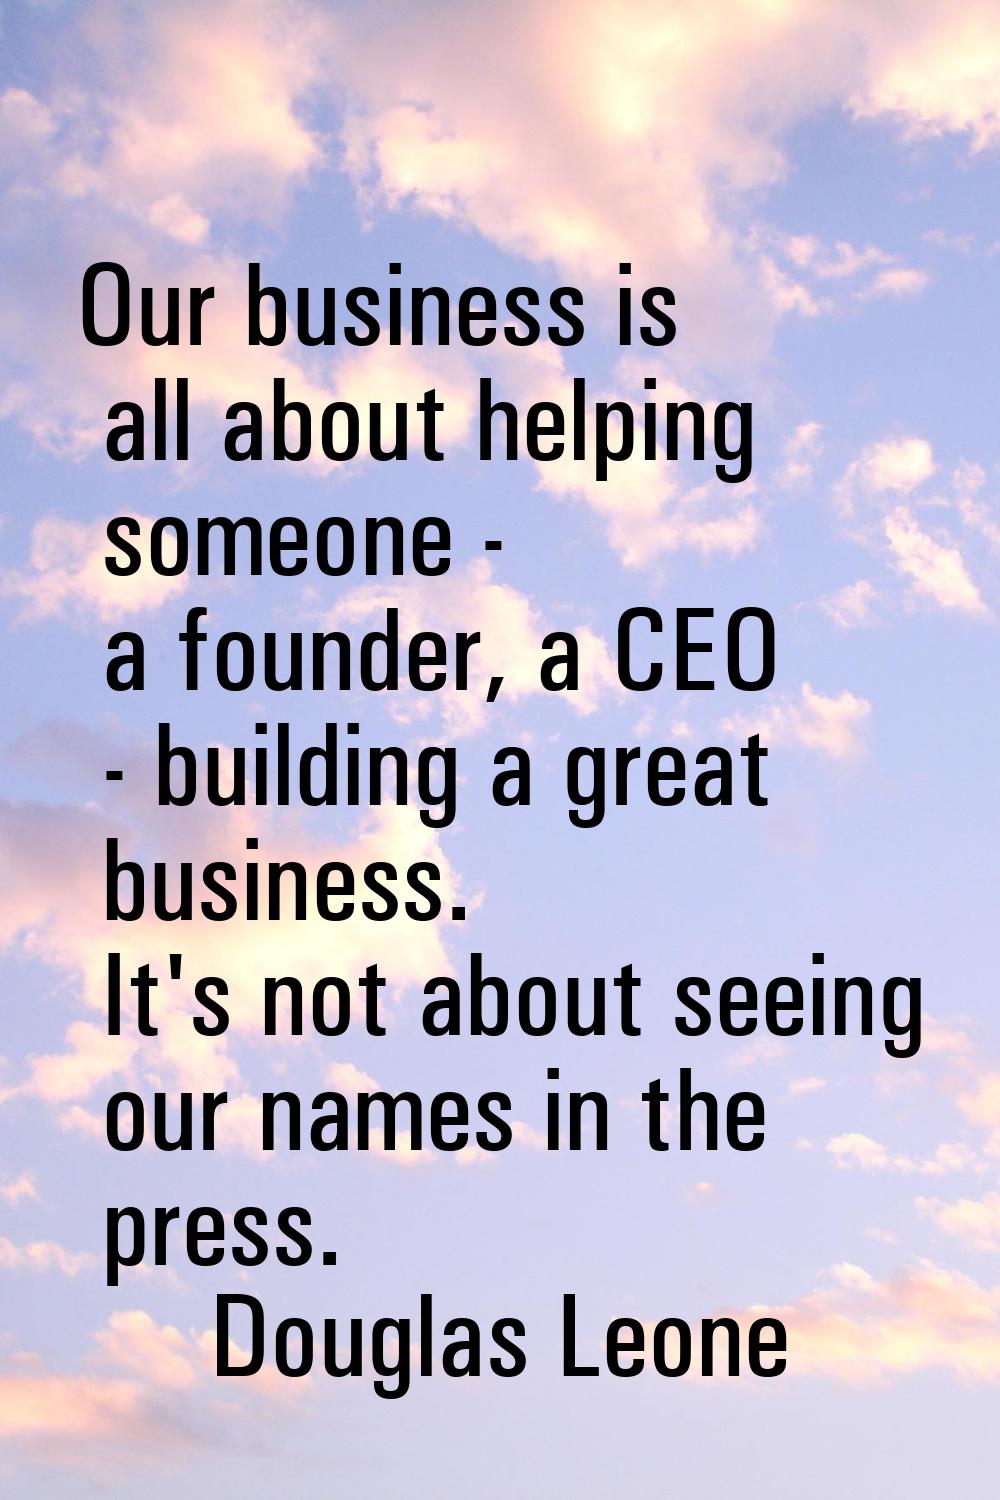 Our business is all about helping someone - a founder, a CEO - building a great business. It's not 